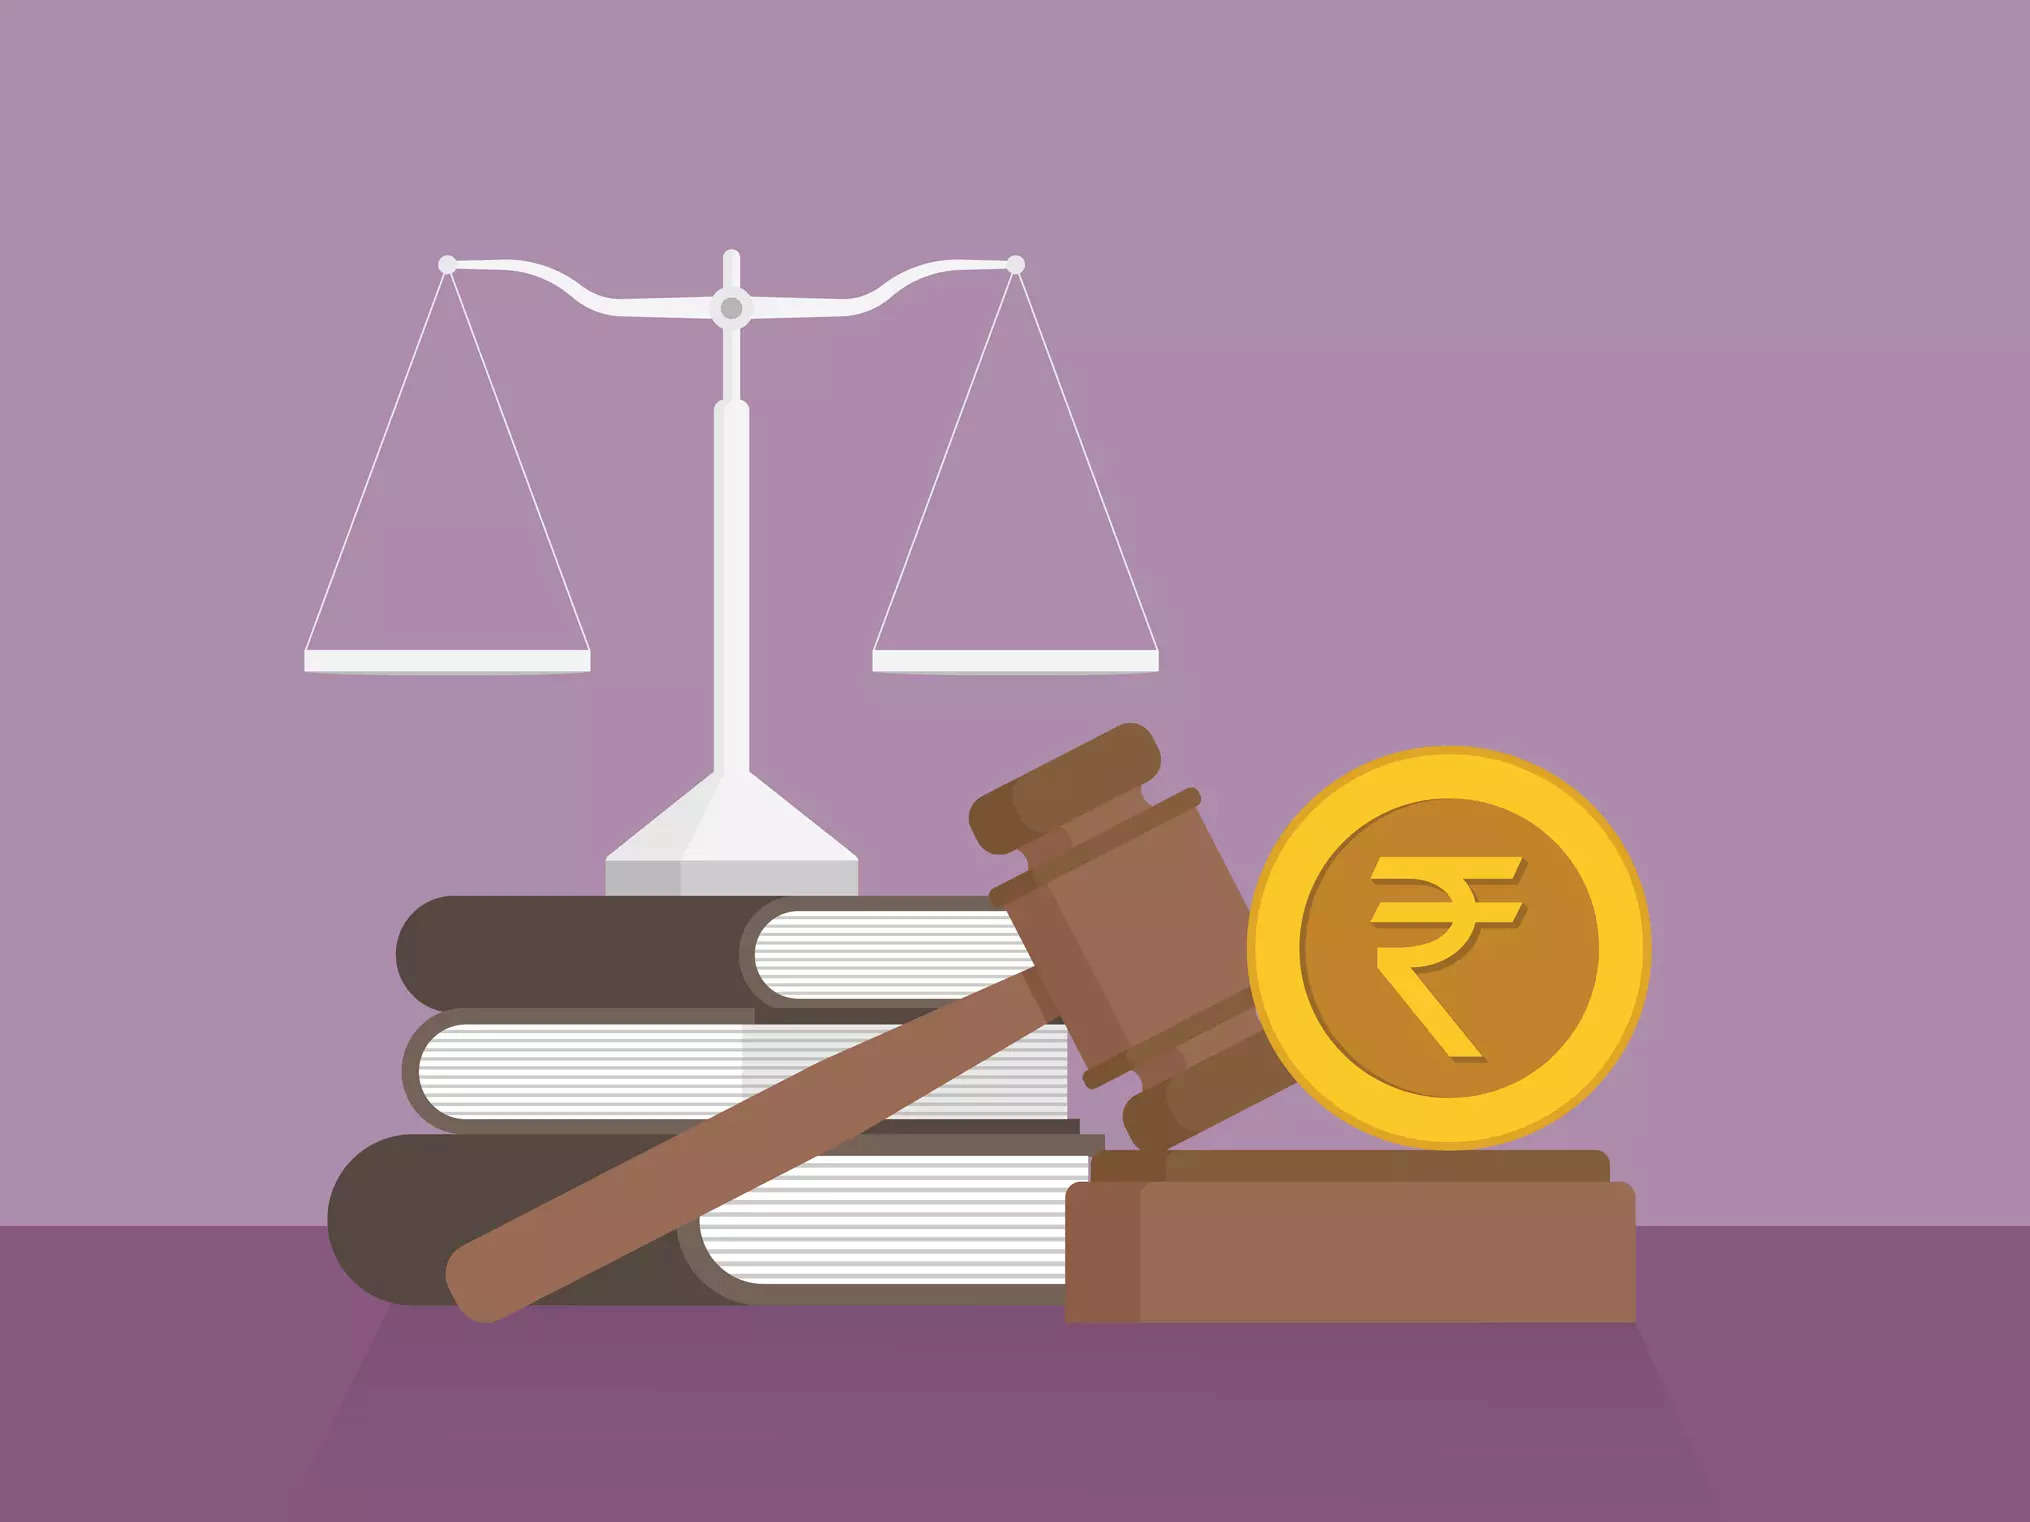 A SC directive has banks disagreeing with CBI on rogue borrowers